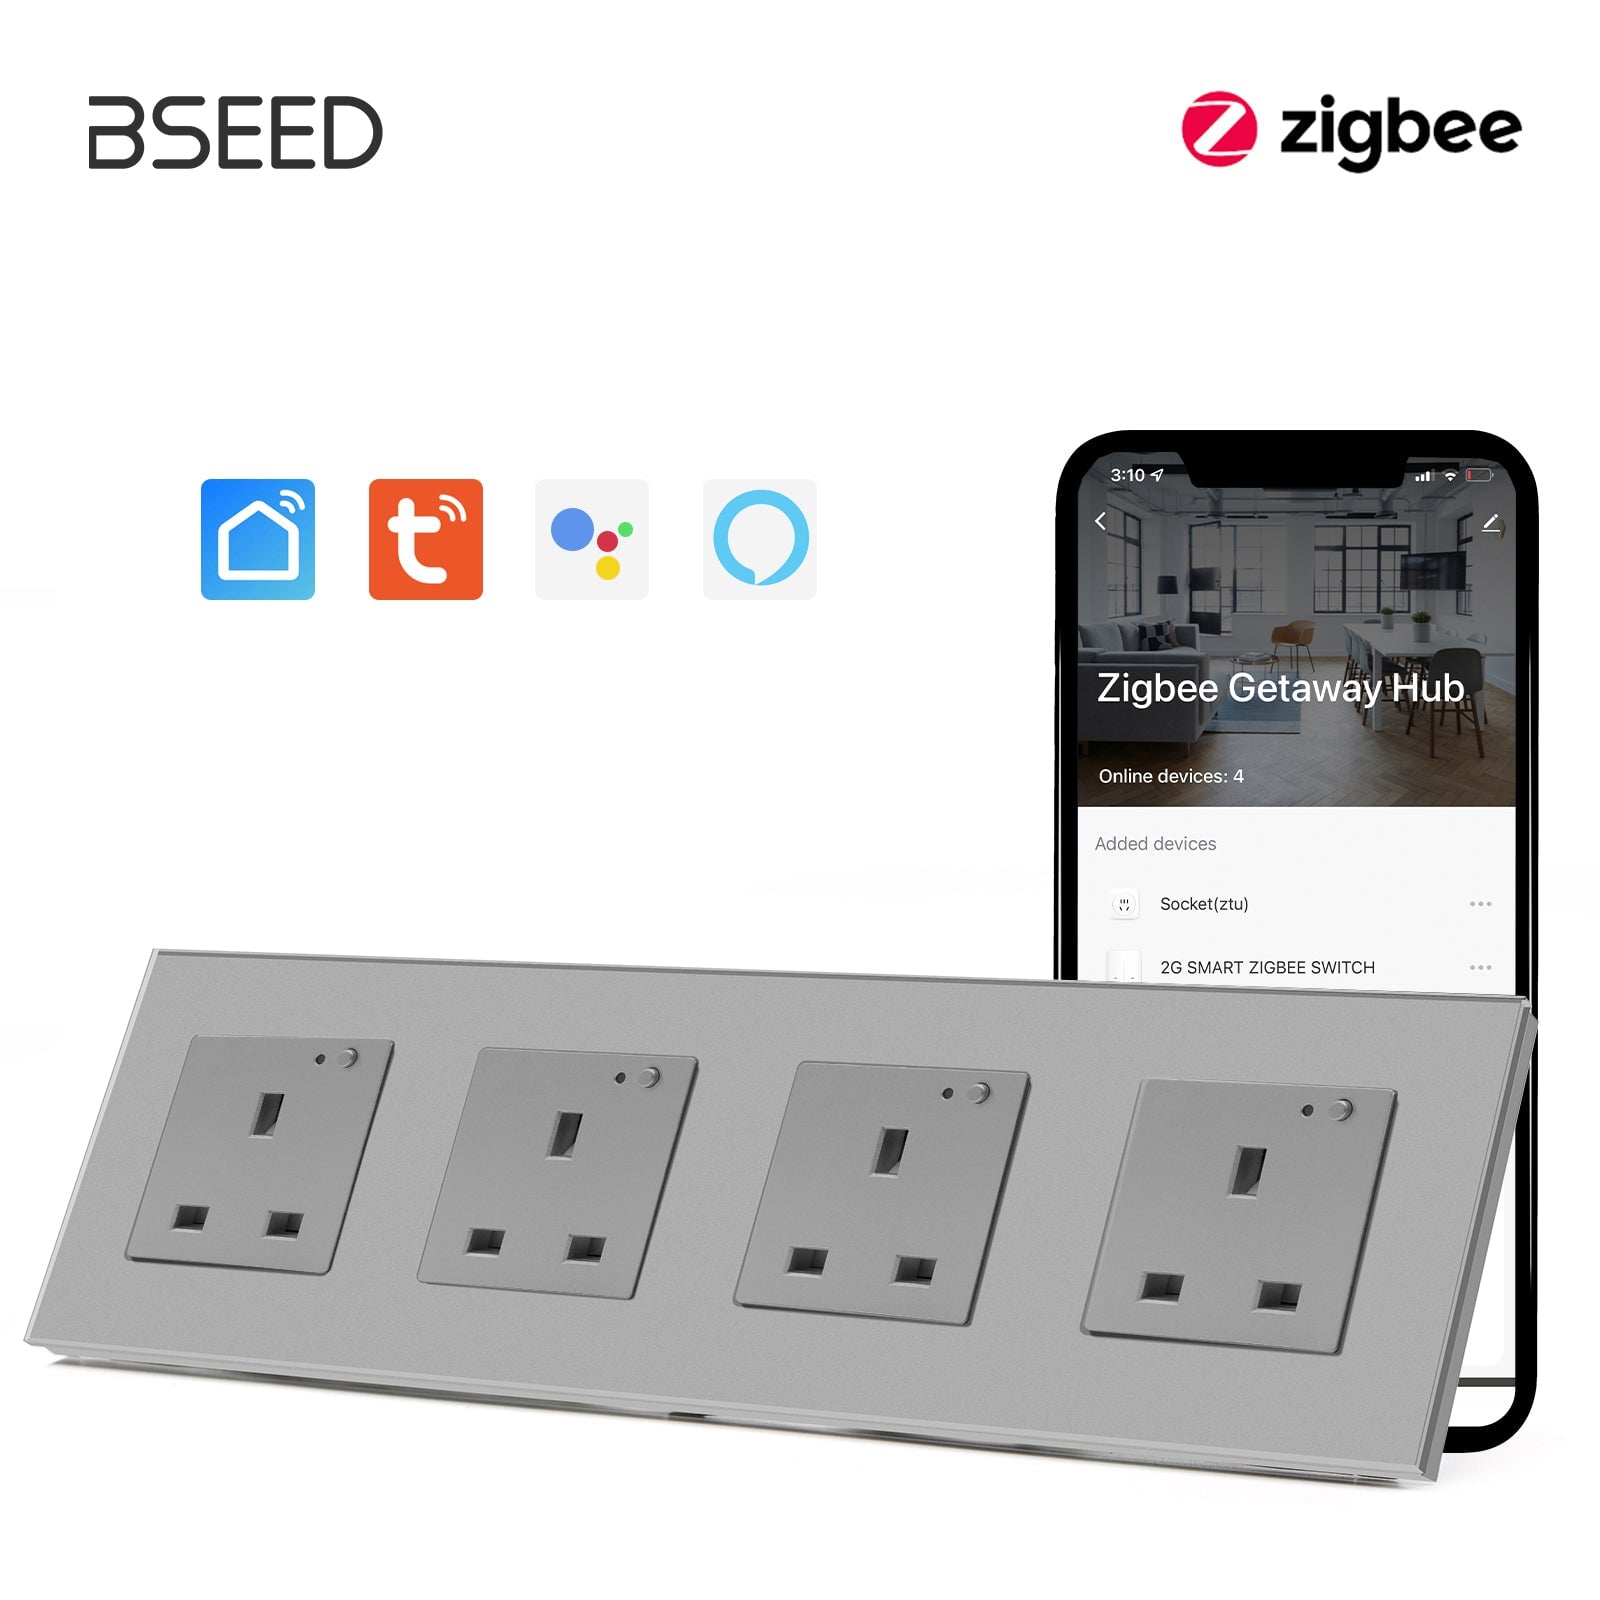 BSEED ZigBee UK Wall Sockets Power Outlets Kids Protection Wall Plates & Covers Bseedswitch grey Quadruple 